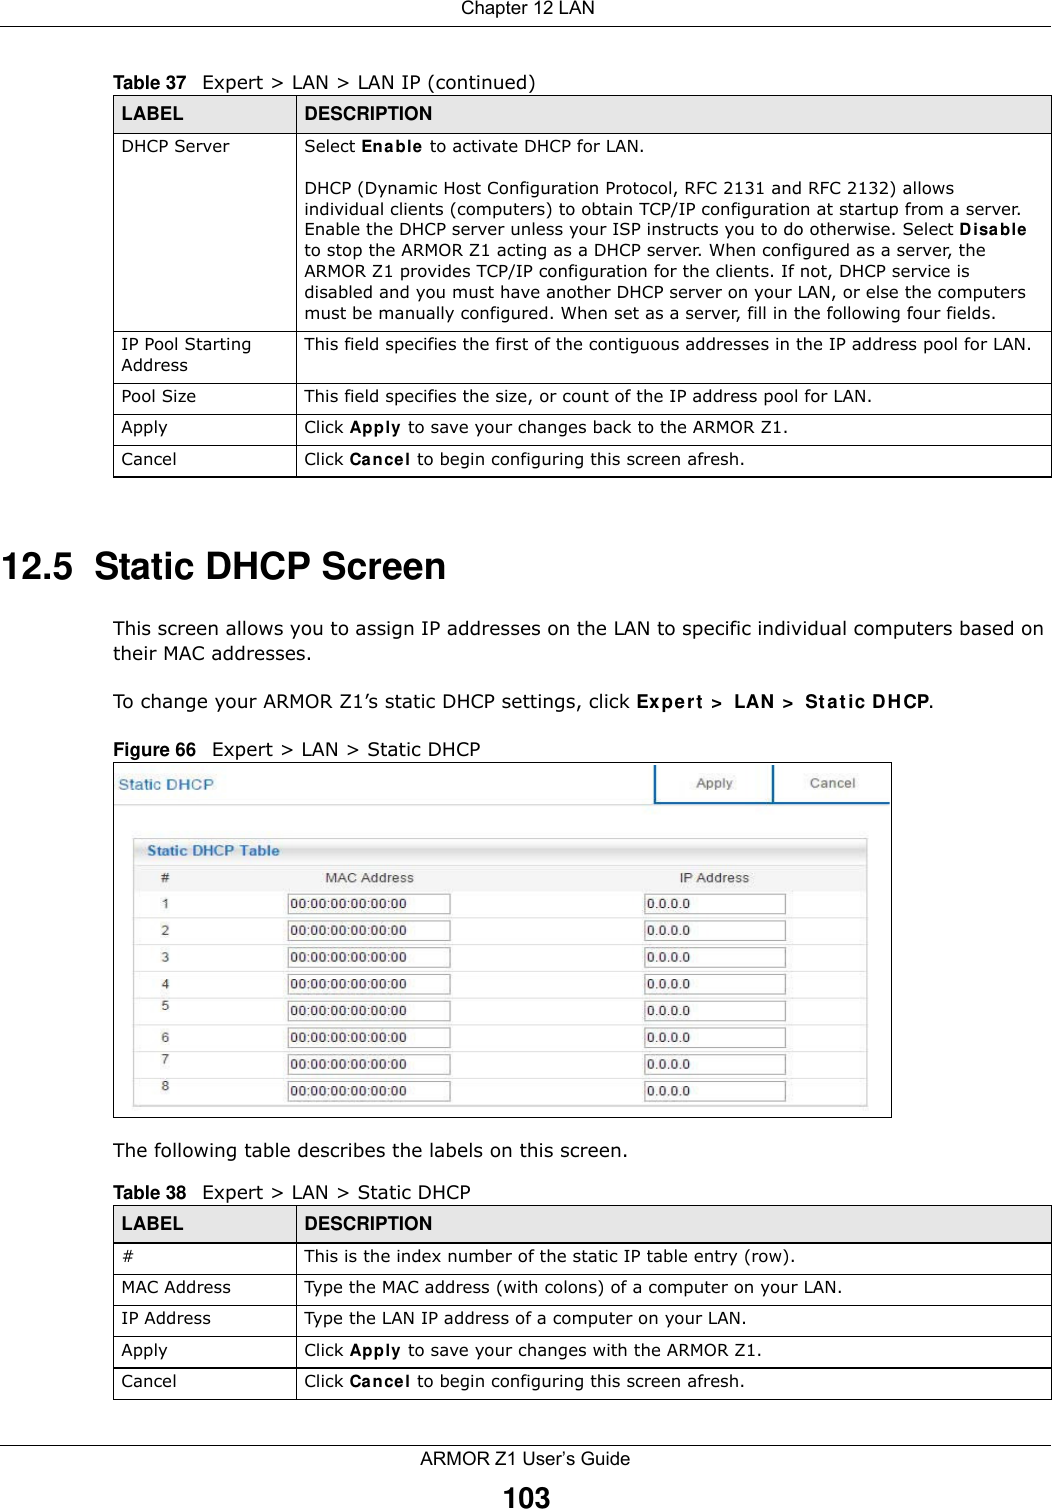  Chapter 12 LANARMOR Z1 User’s Guide10312.5  Static DHCP ScreenThis screen allows you to assign IP addresses on the LAN to specific individual computers based on their MAC addresses. To change your ARMOR Z1’s static DHCP settings, click Expert &gt; LAN &gt; Static DHCP.Figure 66   Expert &gt; LAN &gt; Static DHCP The following table describes the labels on this screen.DHCP Server Select Enable to activate DHCP for LAN.DHCP (Dynamic Host Configuration Protocol, RFC 2131 and RFC 2132) allows individual clients (computers) to obtain TCP/IP configuration at startup from a server. Enable the DHCP server unless your ISP instructs you to do otherwise. Select Disable to stop the ARMOR Z1 acting as a DHCP server. When configured as a server, the ARMOR Z1 provides TCP/IP configuration for the clients. If not, DHCP service is disabled and you must have another DHCP server on your LAN, or else the computers must be manually configured. When set as a server, fill in the following four fields.IP Pool Starting AddressThis field specifies the first of the contiguous addresses in the IP address pool for LAN.Pool Size This field specifies the size, or count of the IP address pool for LAN.Apply Click Apply to save your changes back to the ARMOR Z1.Cancel Click Cancel to begin configuring this screen afresh.Table 37   Expert &gt; LAN &gt; LAN IP (continued)LABEL DESCRIPTIONTable 38   Expert &gt; LAN &gt; Static DHCP LABEL DESCRIPTION#This is the index number of the static IP table entry (row).MAC Address Type the MAC address (with colons) of a computer on your LAN.IP Address Type the LAN IP address of a computer on your LAN.Apply Click Apply to save your changes with the ARMOR Z1.Cancel Click Cancel to begin configuring this screen afresh.